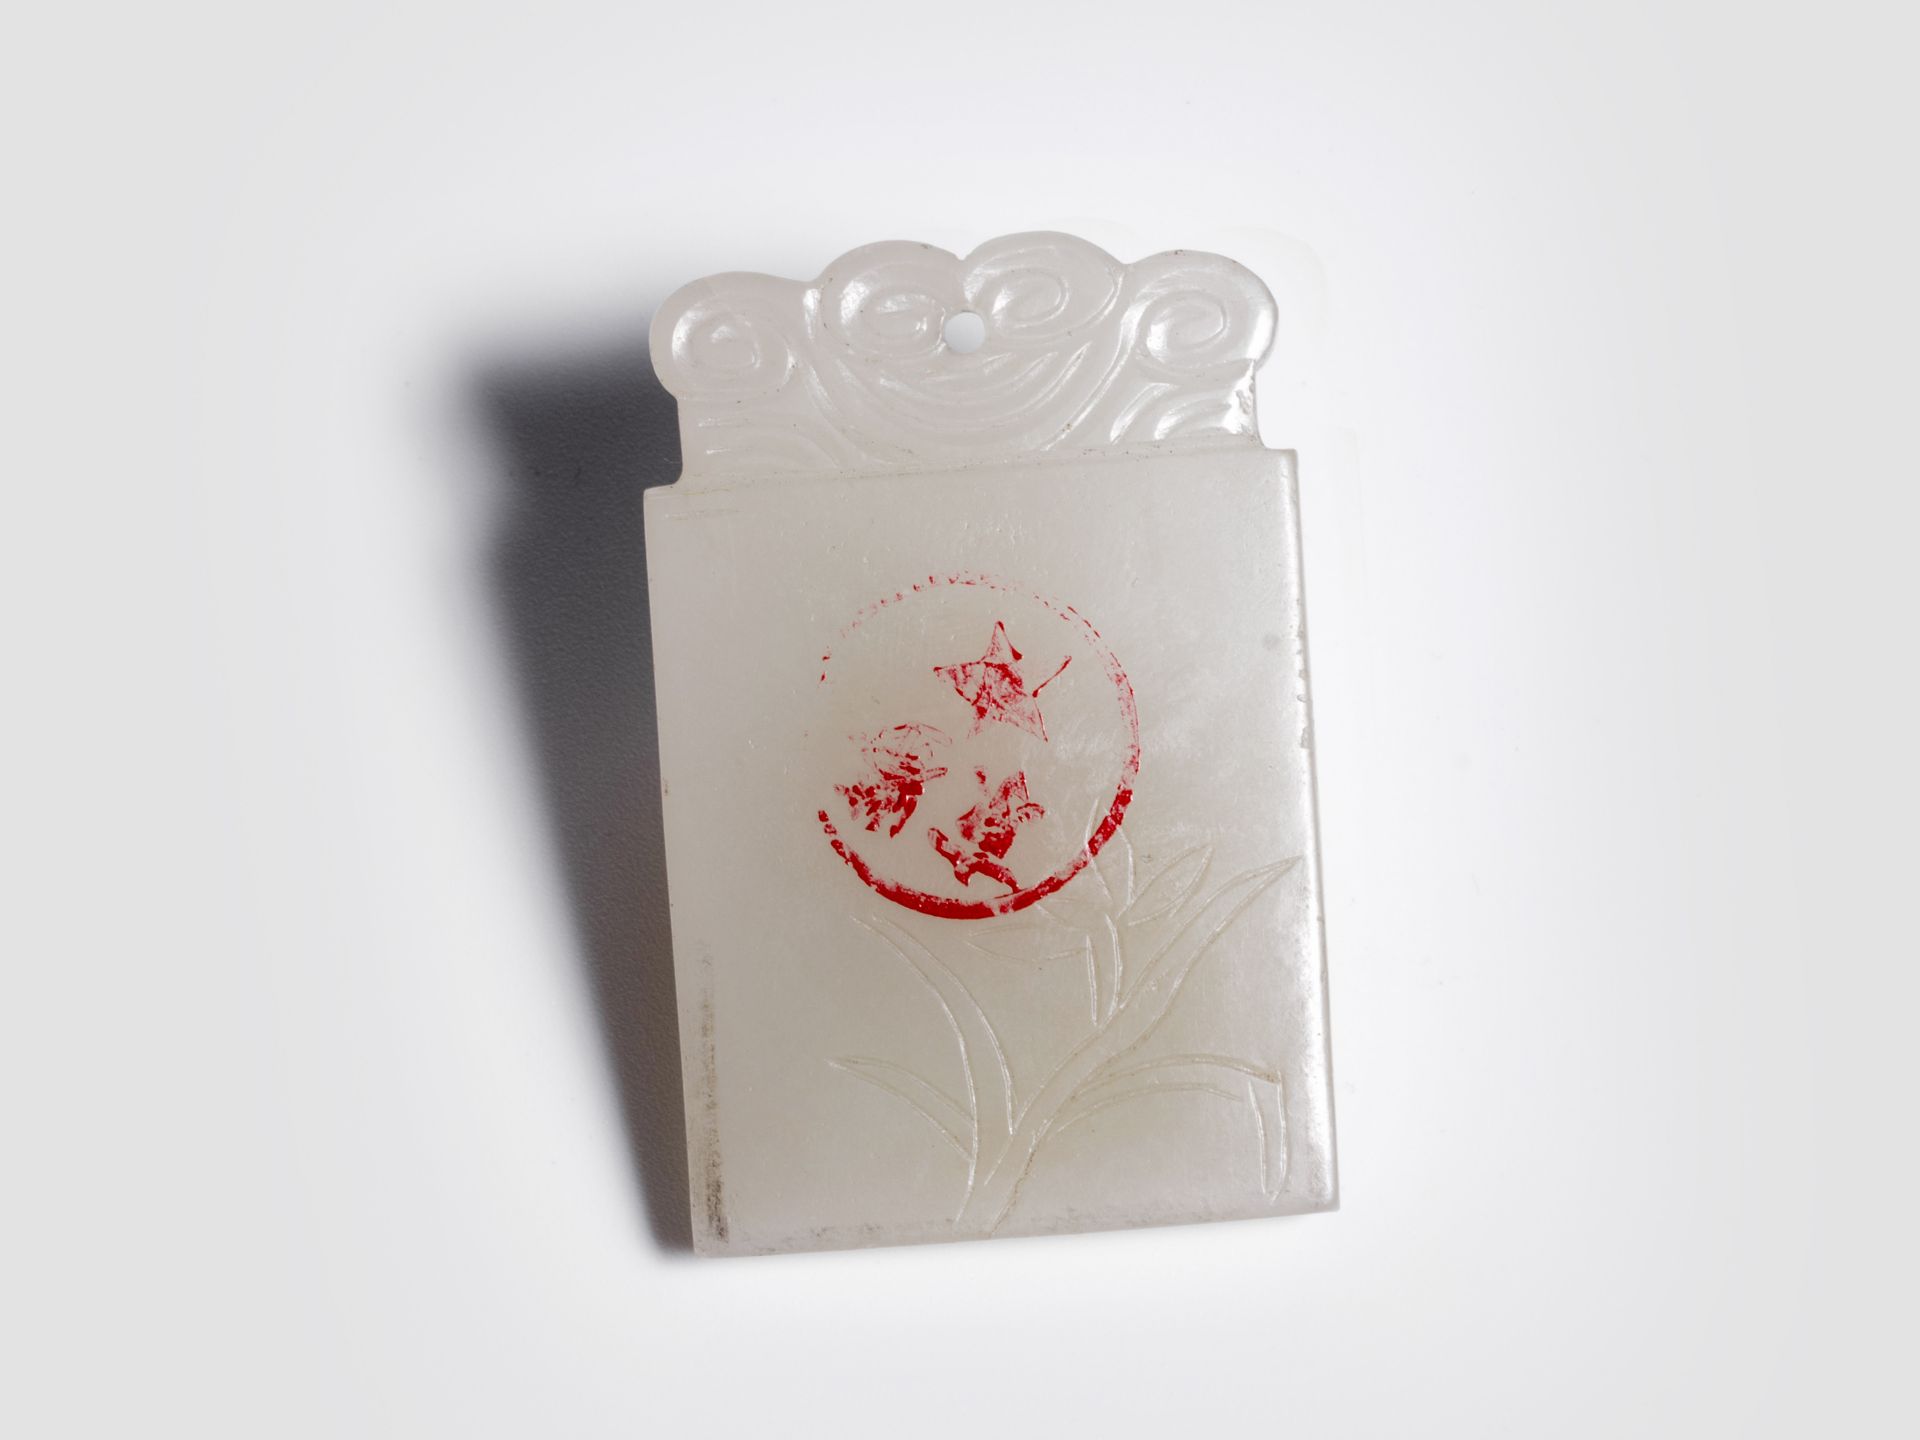 Jade pendant, China, Quing dynasty - Image 2 of 2